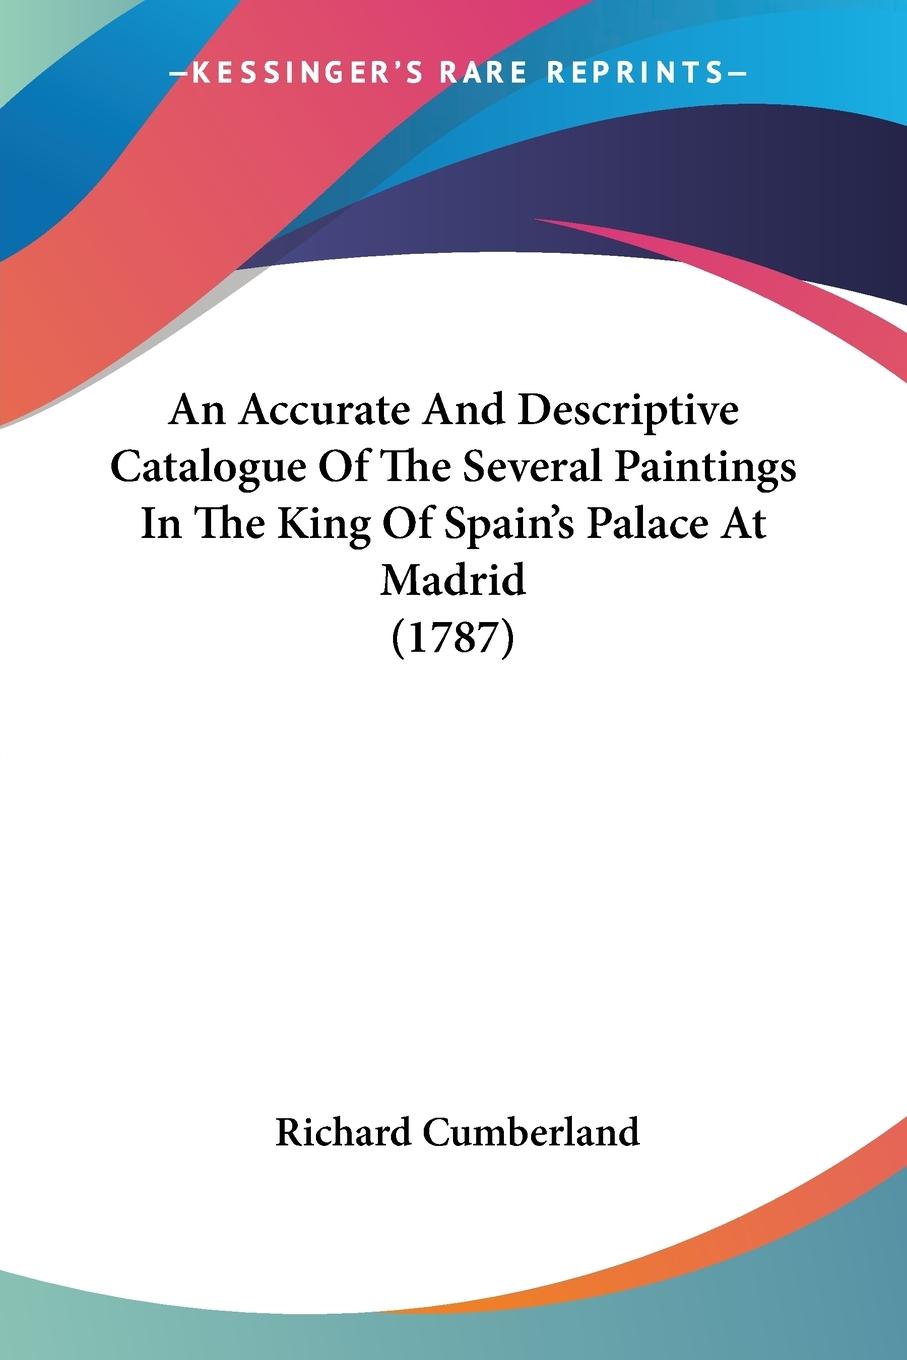 An Accurate And Descriptive Catalogue Of The Several Paintings In The King Of Spain s Palace At Madrid (1787) - Cumberland, Richard